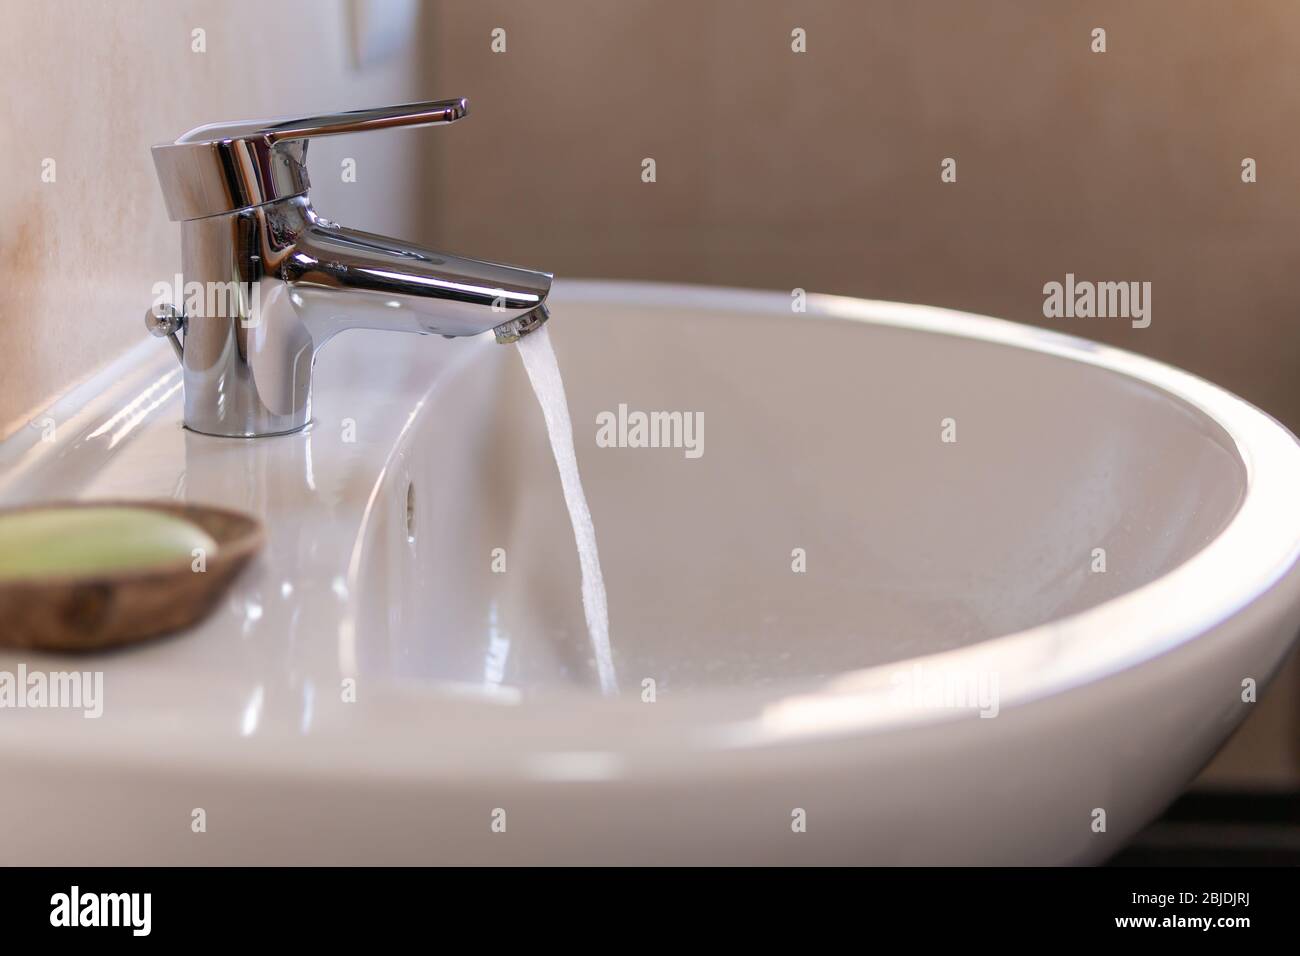 Running water tap spills water in wash basin. Concepts of cleaning,  hygiene, waste of money, saving money at utilities, economical usage of  water Stock Photo - Alamy